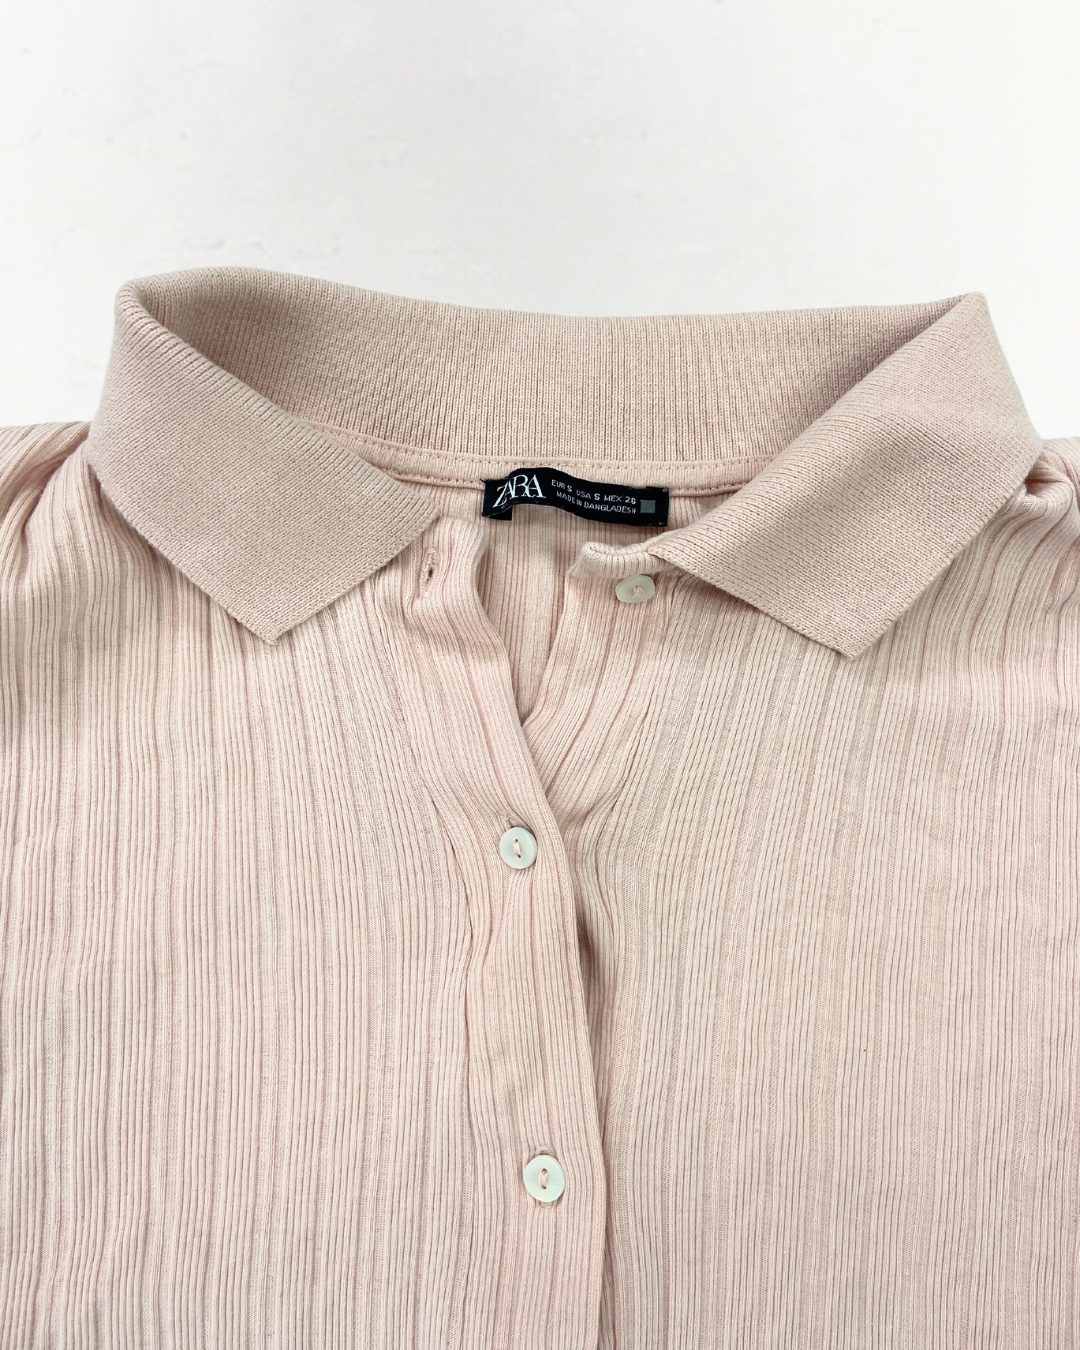 second hand Zara Zara Pink Ribbed Top Size Small 5 OWNI